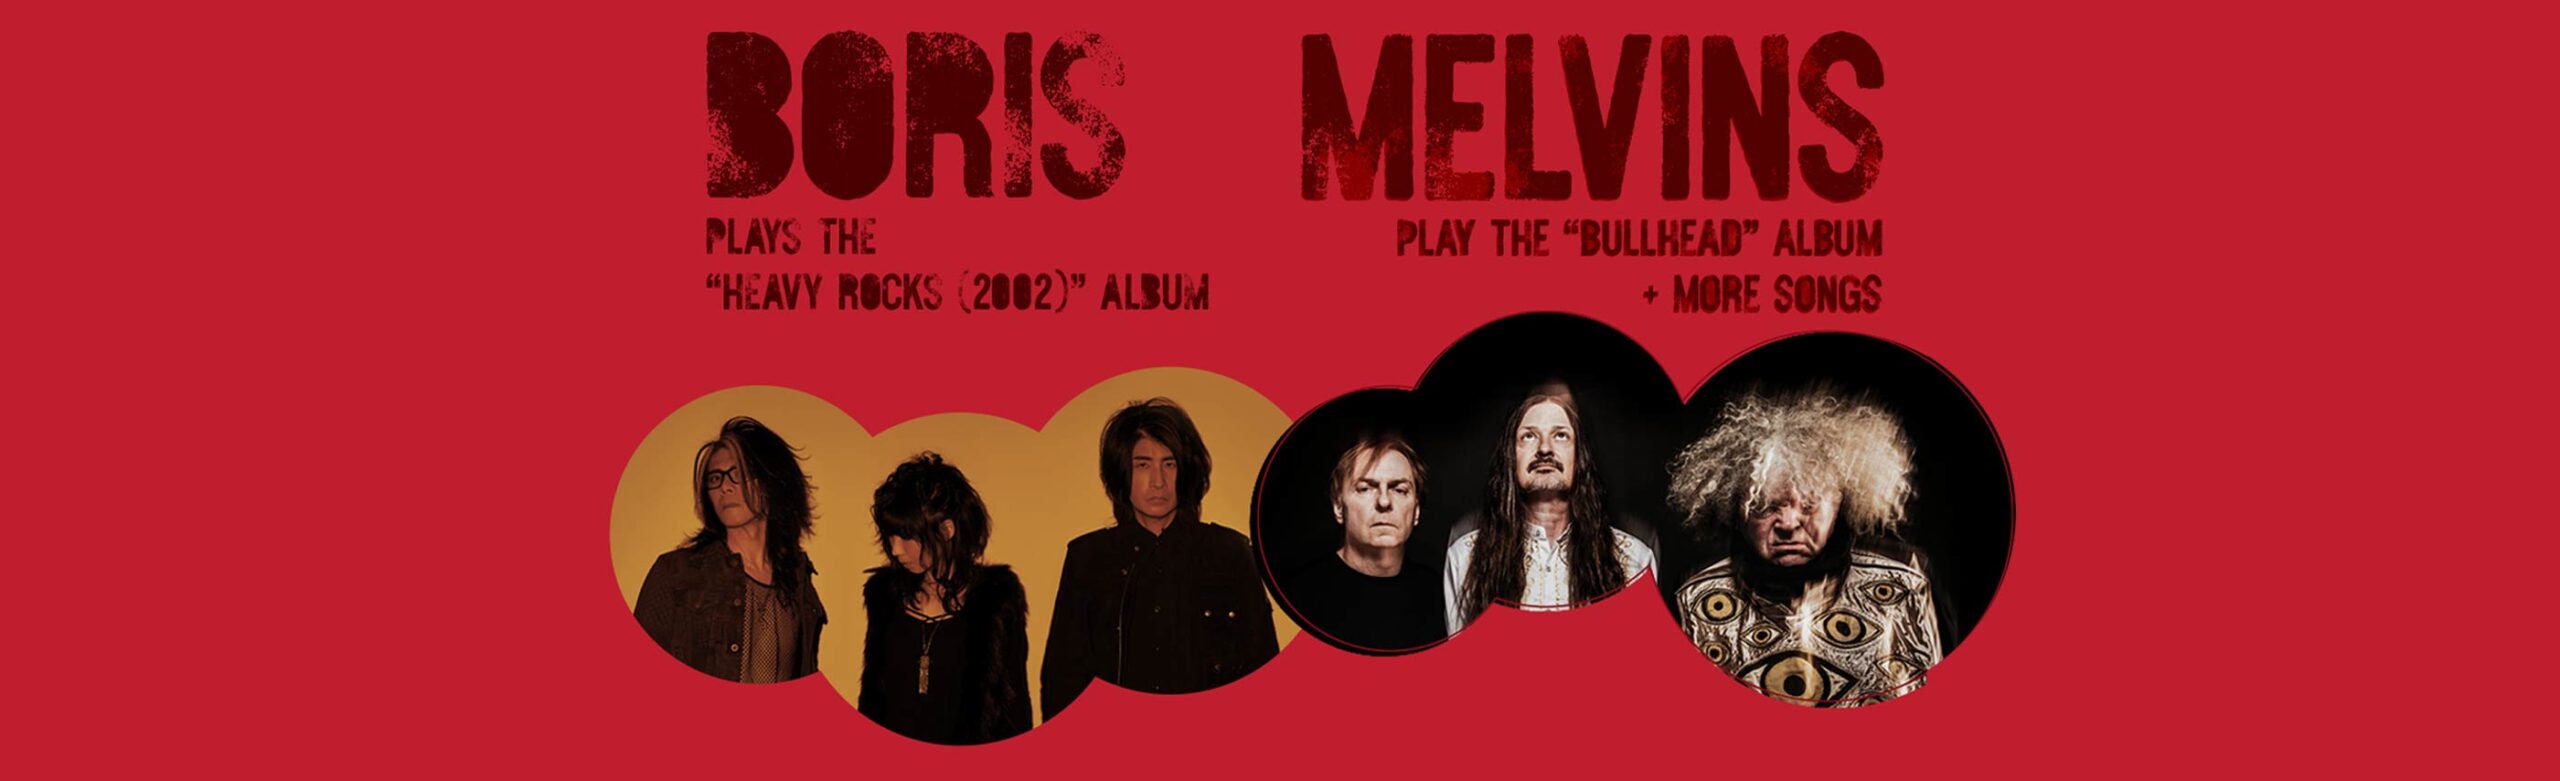 Boris and Melvins Join Forces for Coheadlining Concert at The ELM to Perform “Heavy Rocks” and “Bullhead” Albums Image